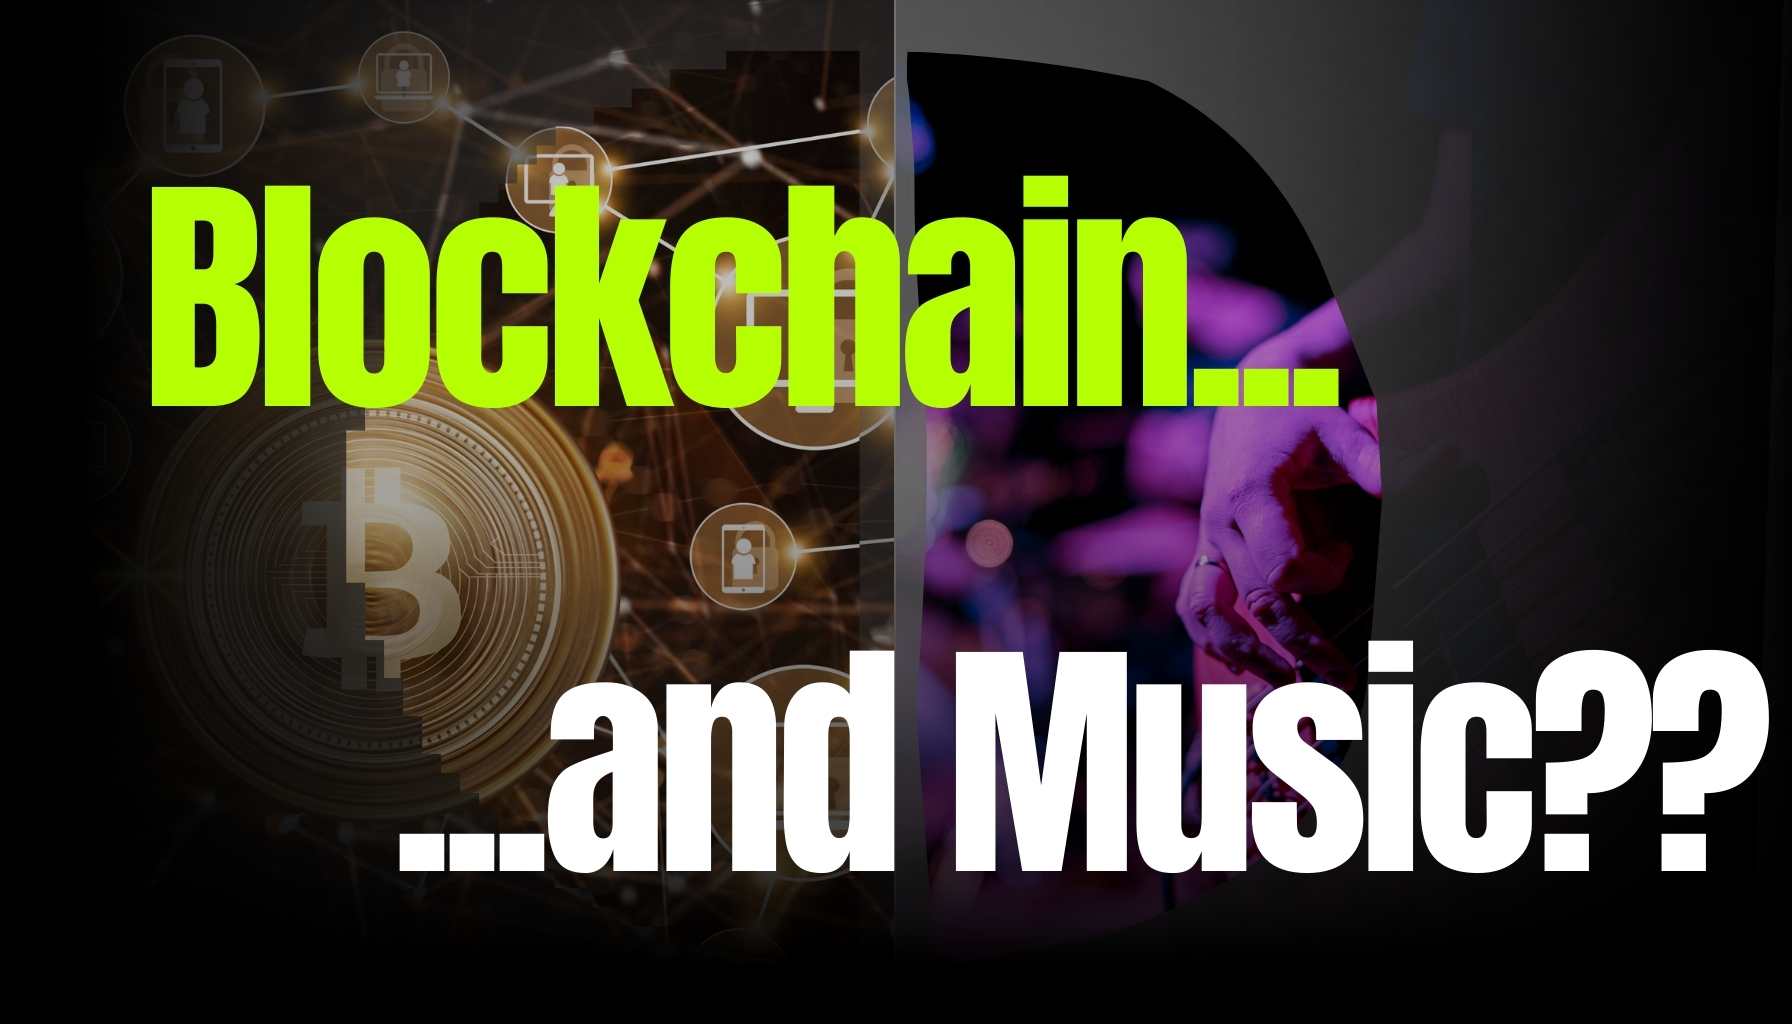 an image of various Cryptocurrencies and blockchain half and the other half a guitar strumming along some music